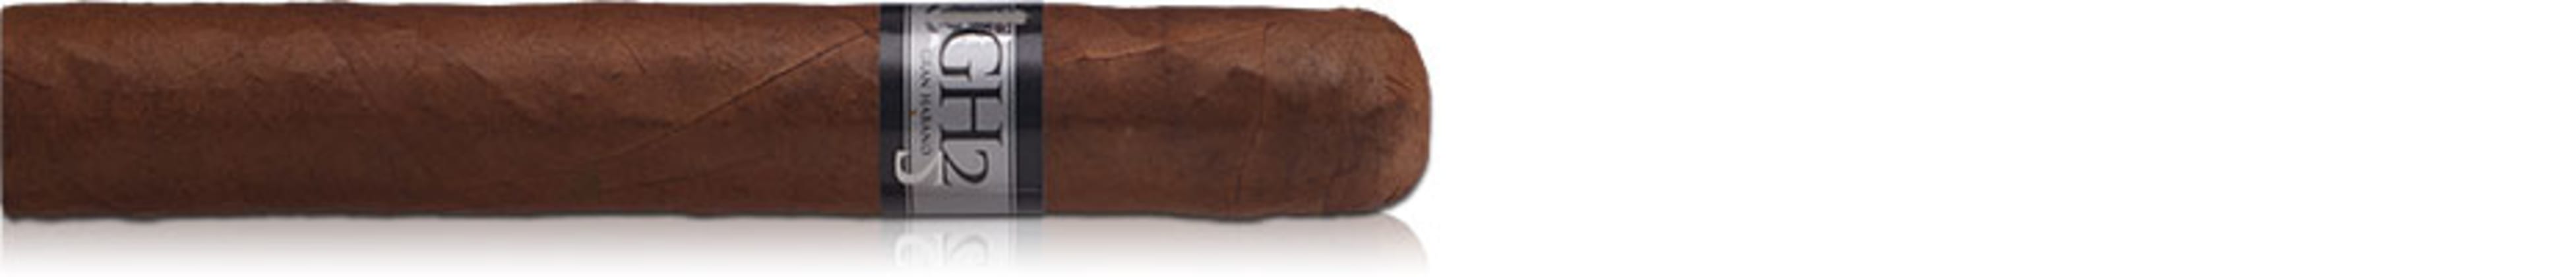 GH2 by Gran Habano Epicure Single